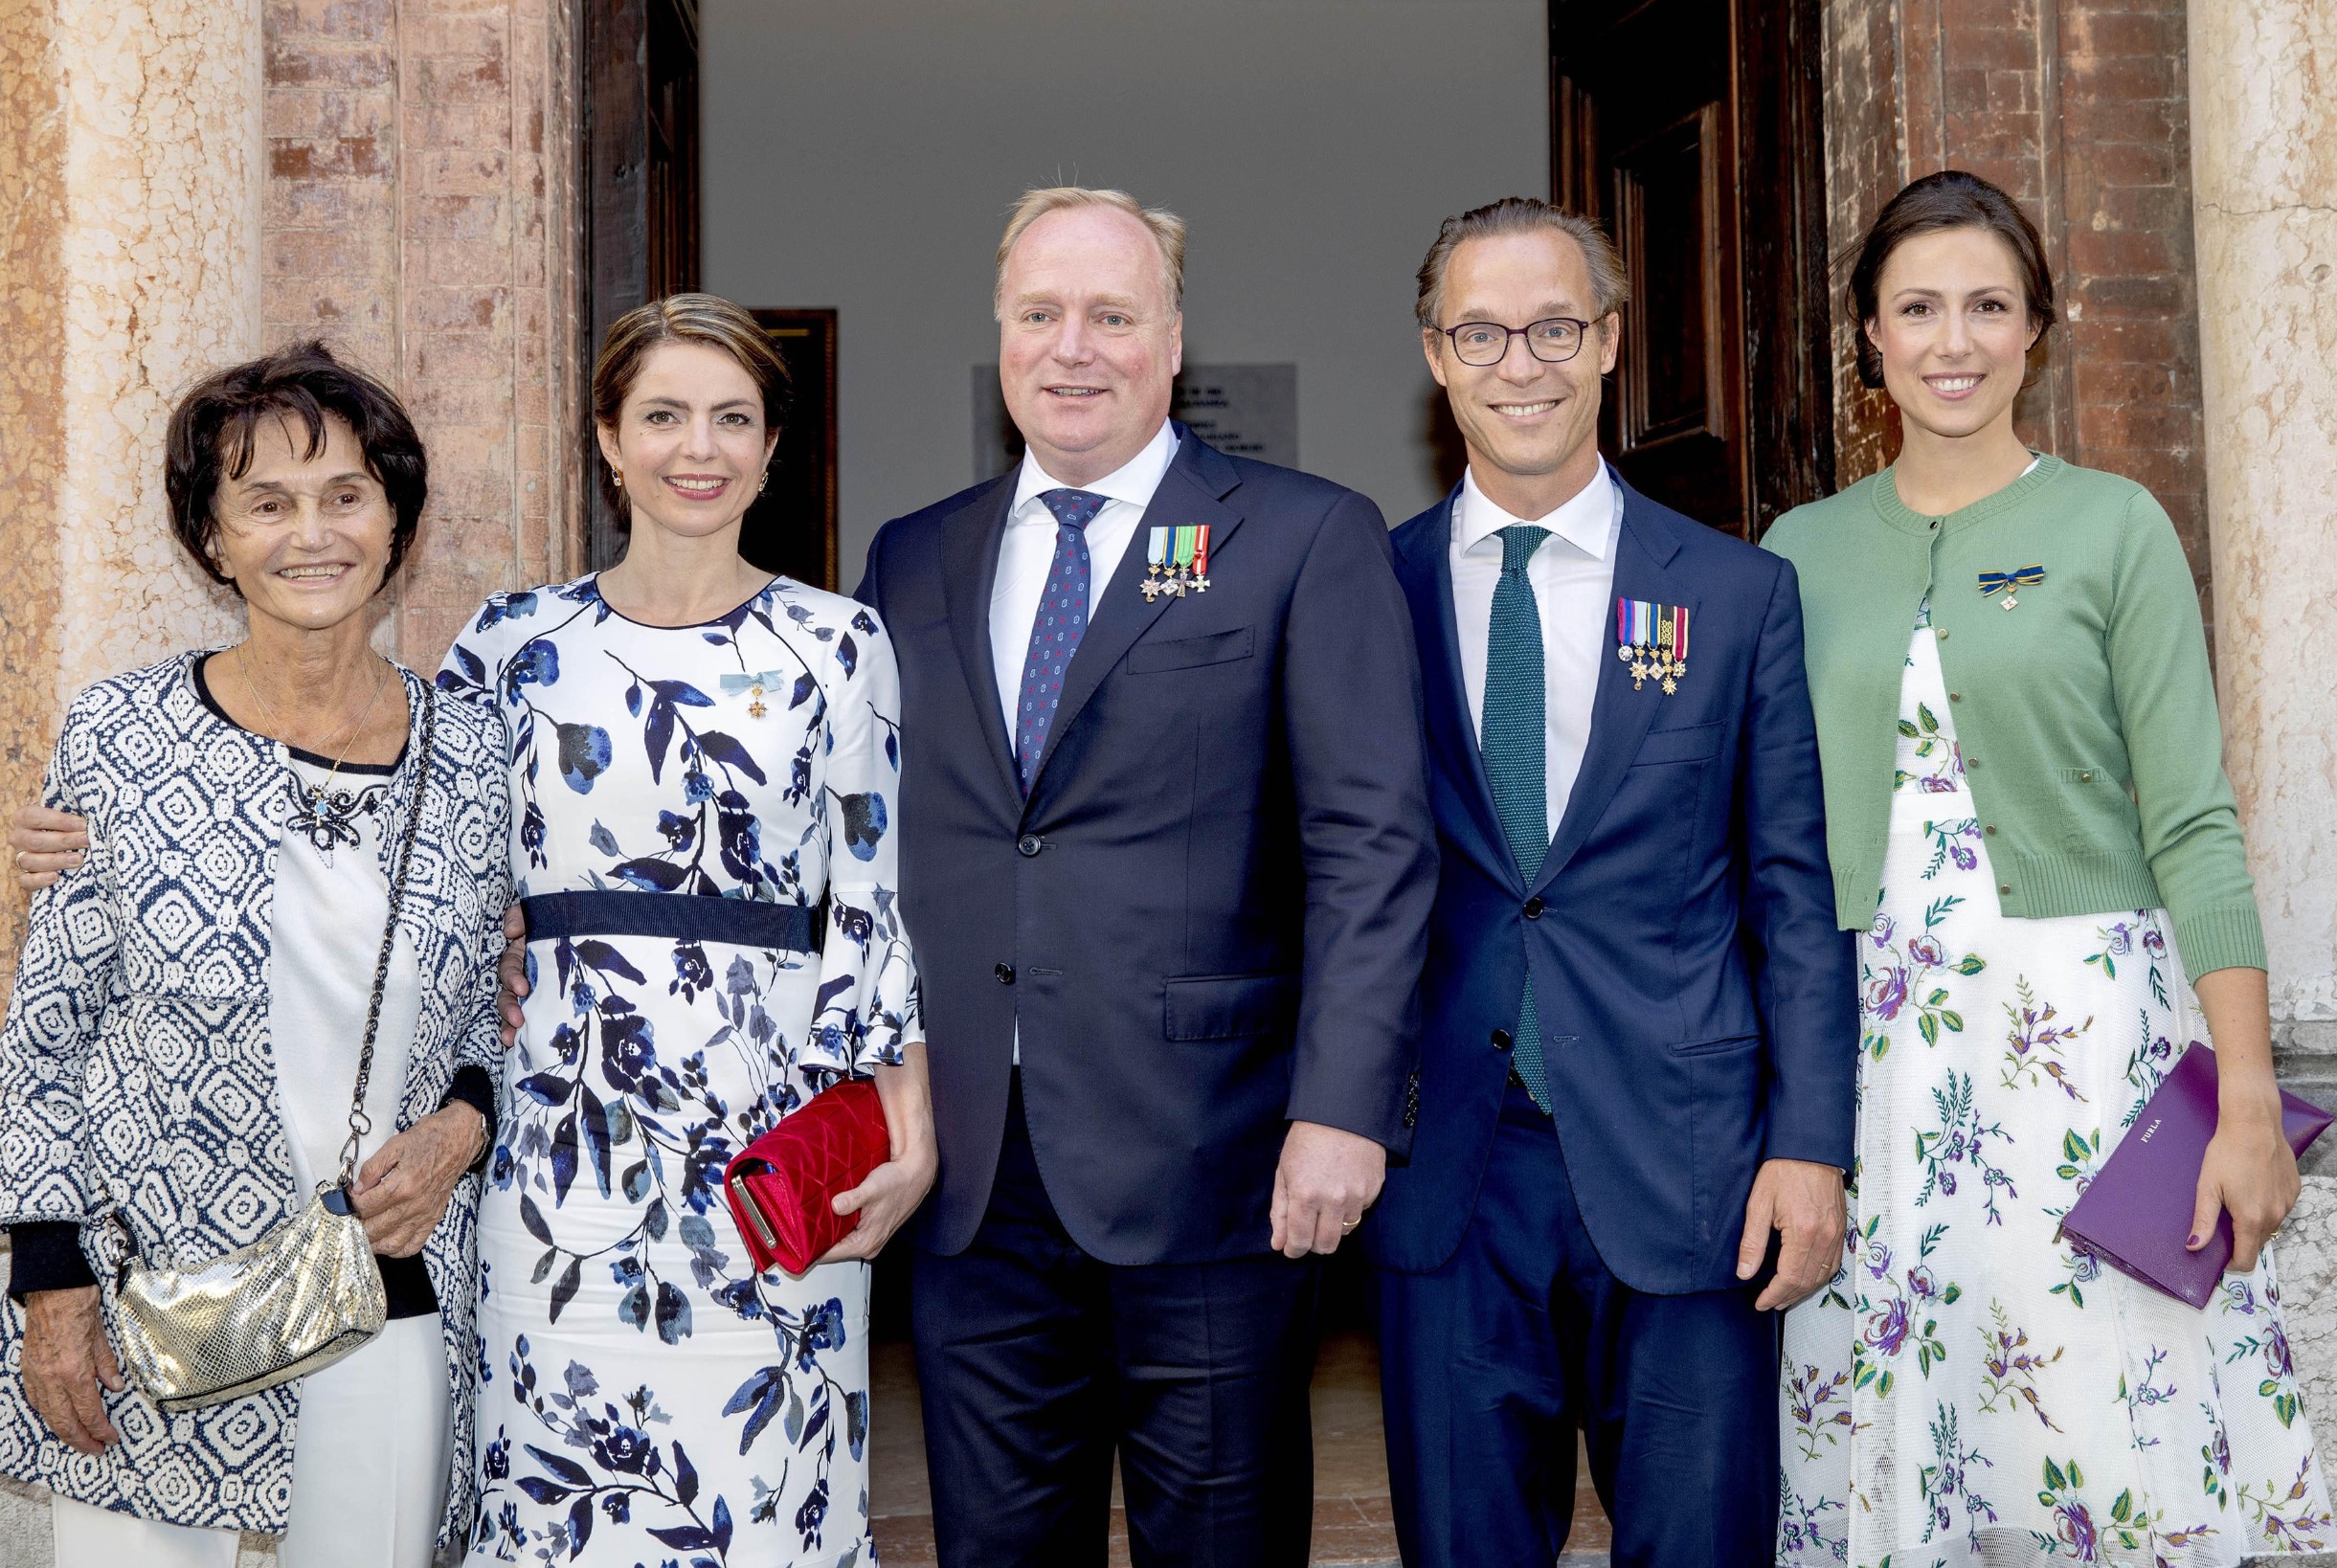 29-09-2018 Parma Family de Bourbon de Parme visiting the Steccata church in Parma, Italy. Prince Carlos de Bourbon de Parme and Princess Annemarie and Prince Jaime and Princess Viktoria
Aunt princess Maria Teresa

Start of missions commissioned by Don James Schianchi and Don Rosolo Tarasconi and ceremony awards (decided in Sacrestie van de Steccata)

., Image: 389198705, License: Rights-managed, Restrictions: , Model Release: no, Credit line: PPE/face to face / Face to Face / Profimedia